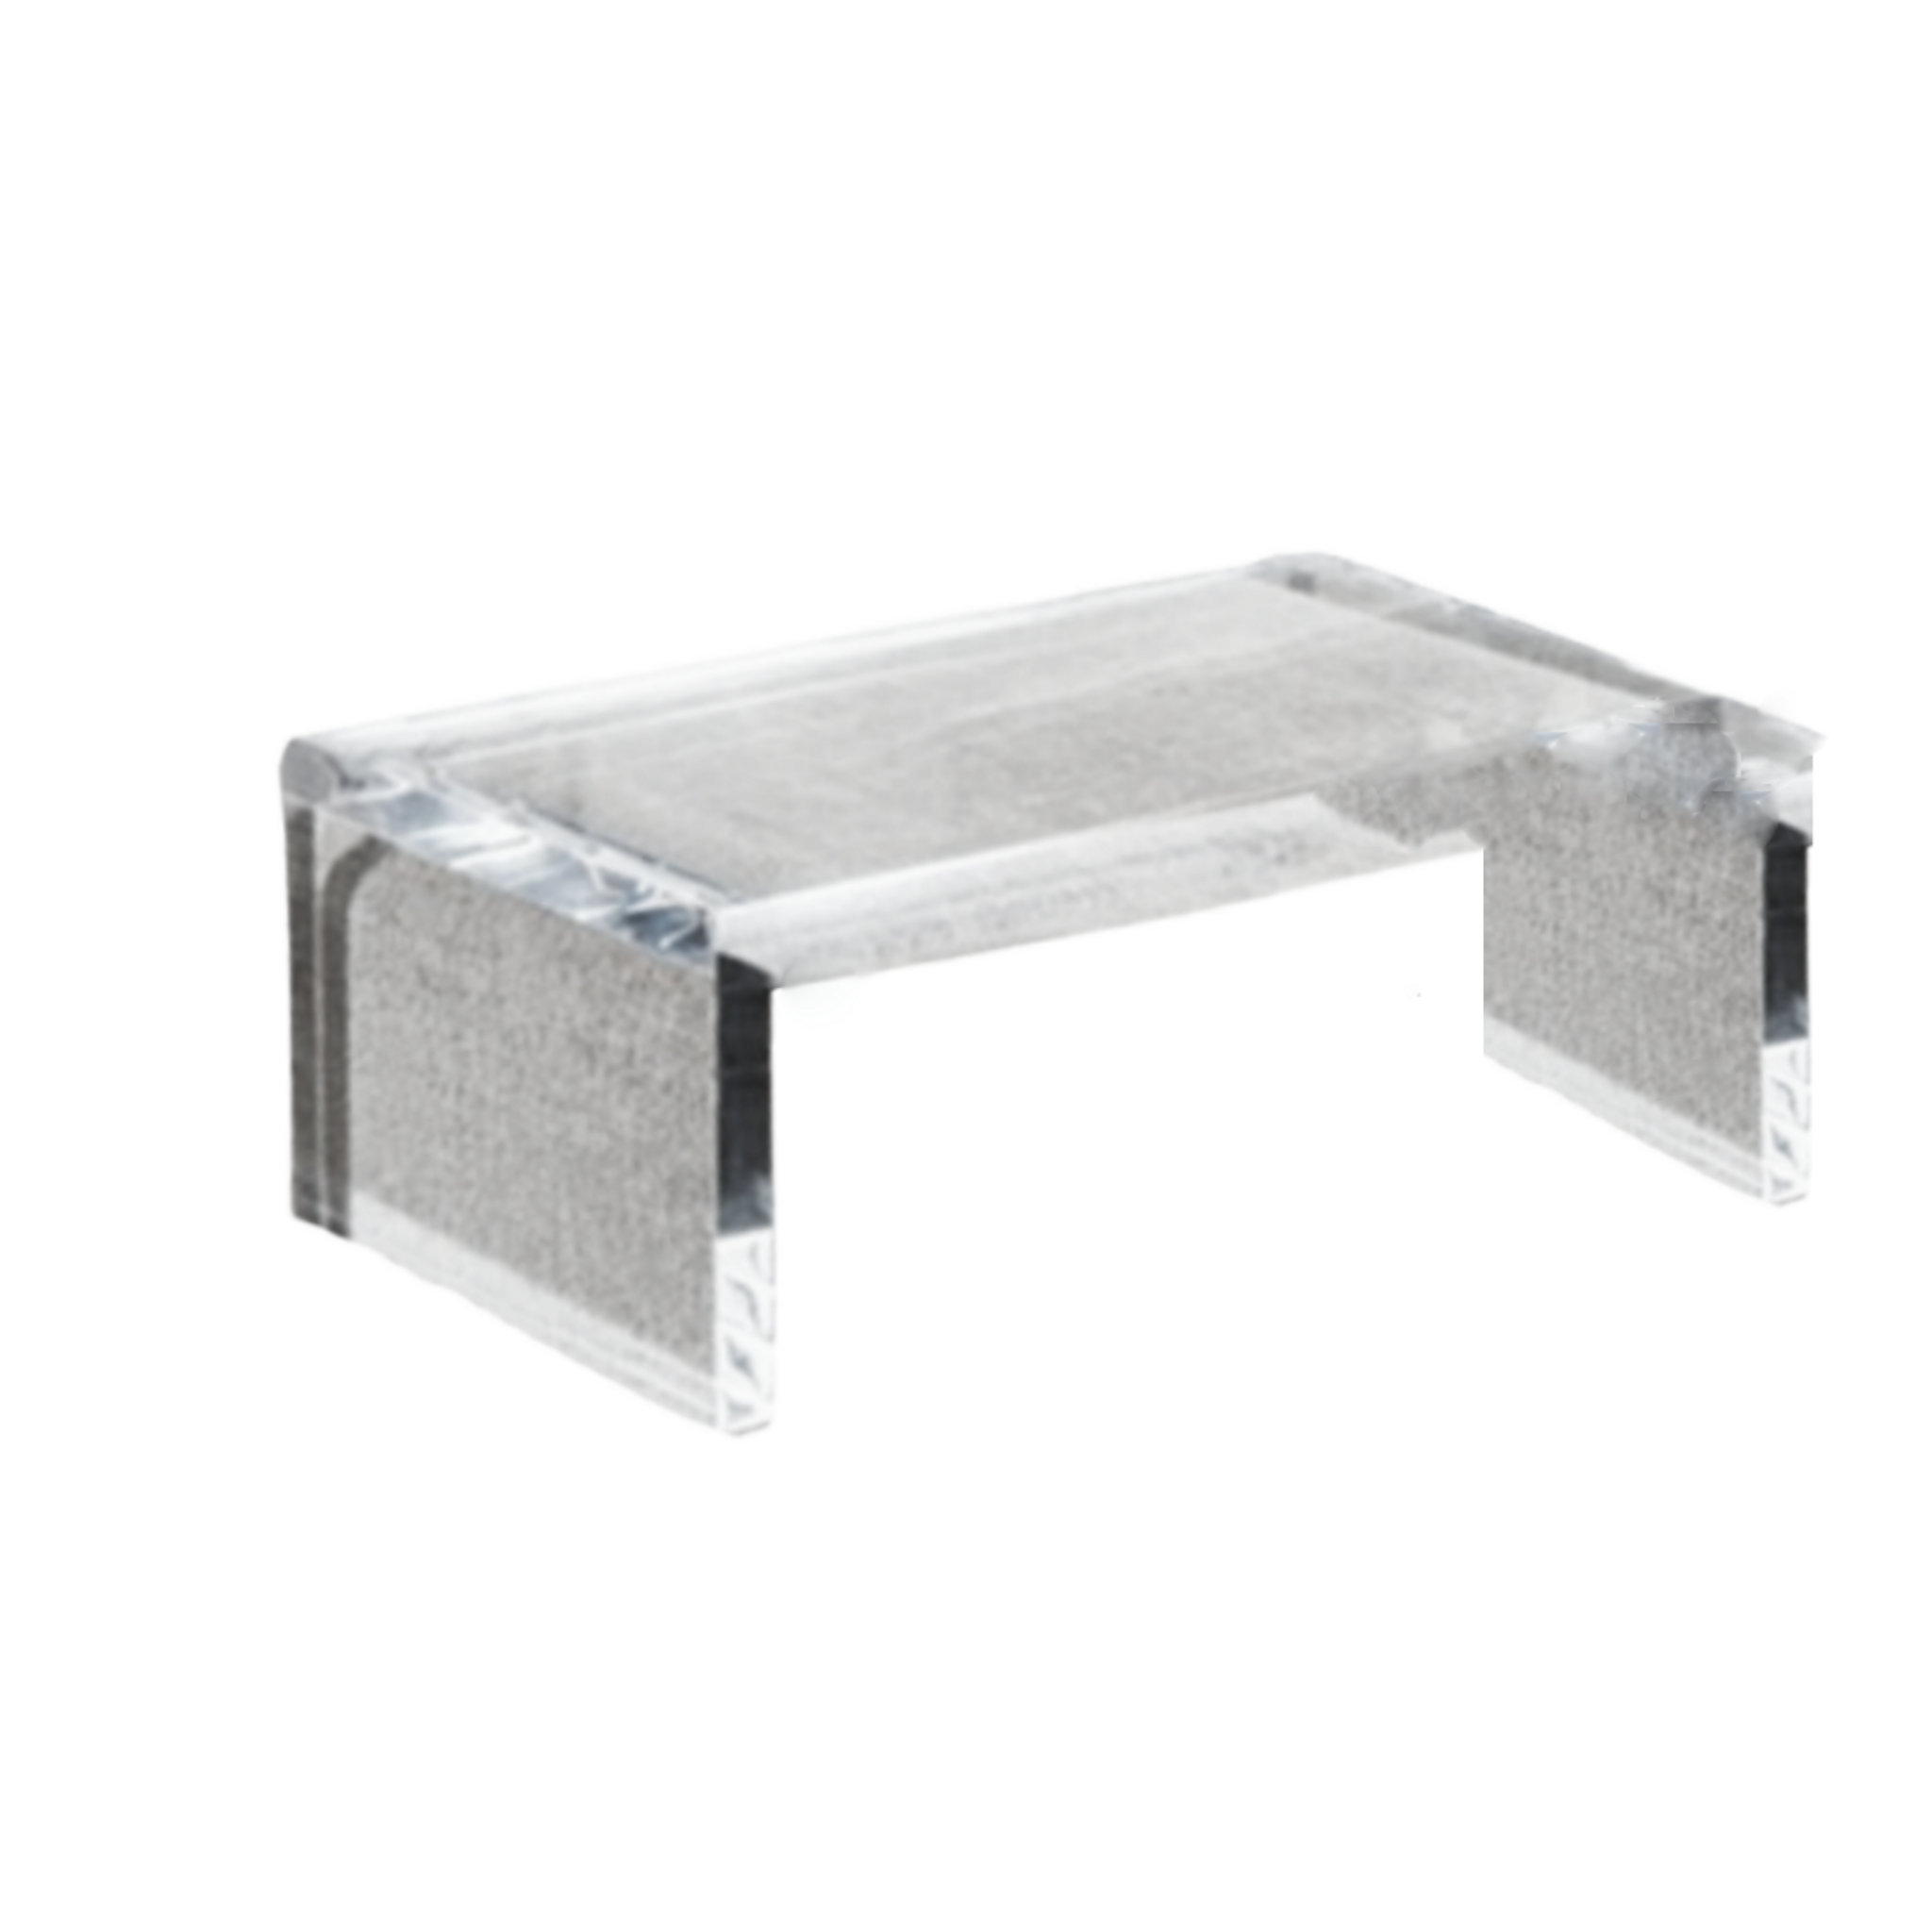 Clear Acrylic Armrest Tray For Drink or Phone